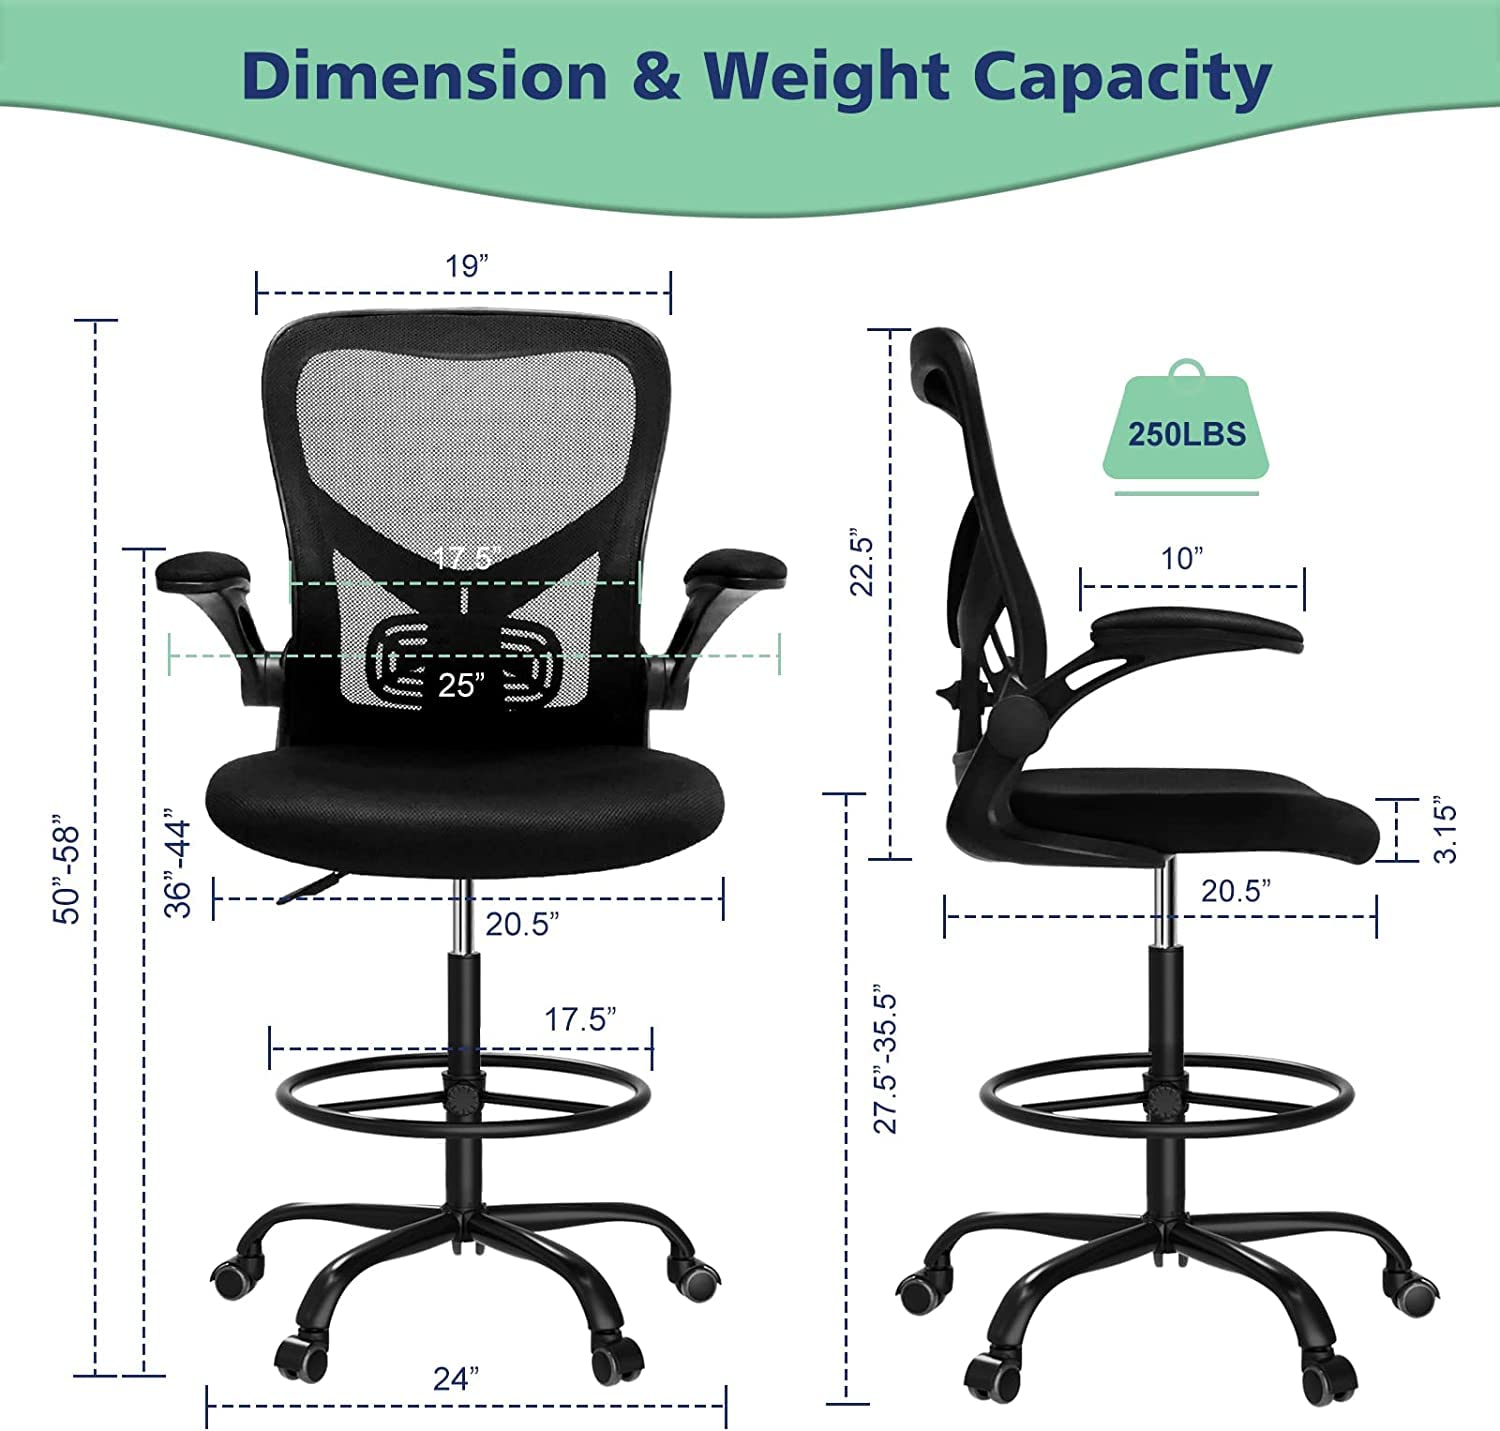 Drafting Chair,Tall Standing Desk Chair Comfortable Office Chair with Foot Ring Flip-up Padded Arms Height Adjustable Computer Task Chair Ergonomic Mesh Mid-Back Desk Chair,Black